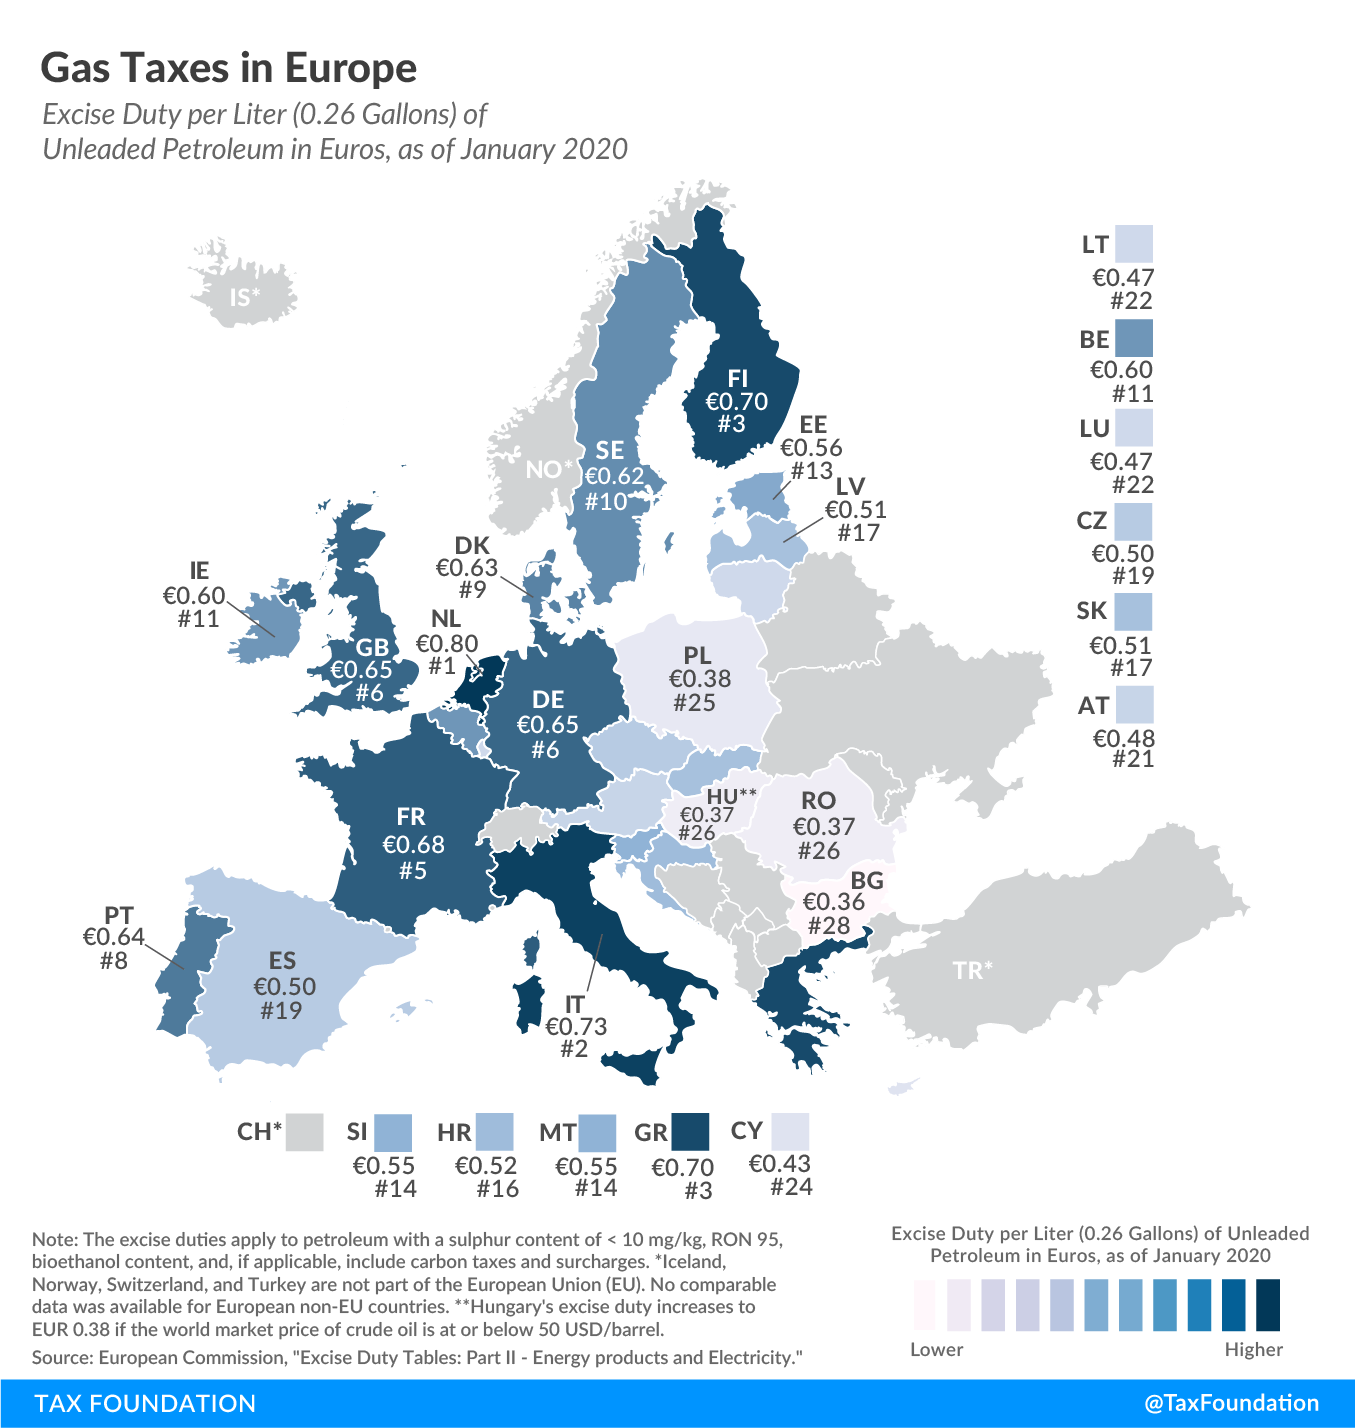 Gas taxes in Europe, How do gas taxes in Europe compare? Compare gas tax rates in Europe 2020 gas tax rates in the EU